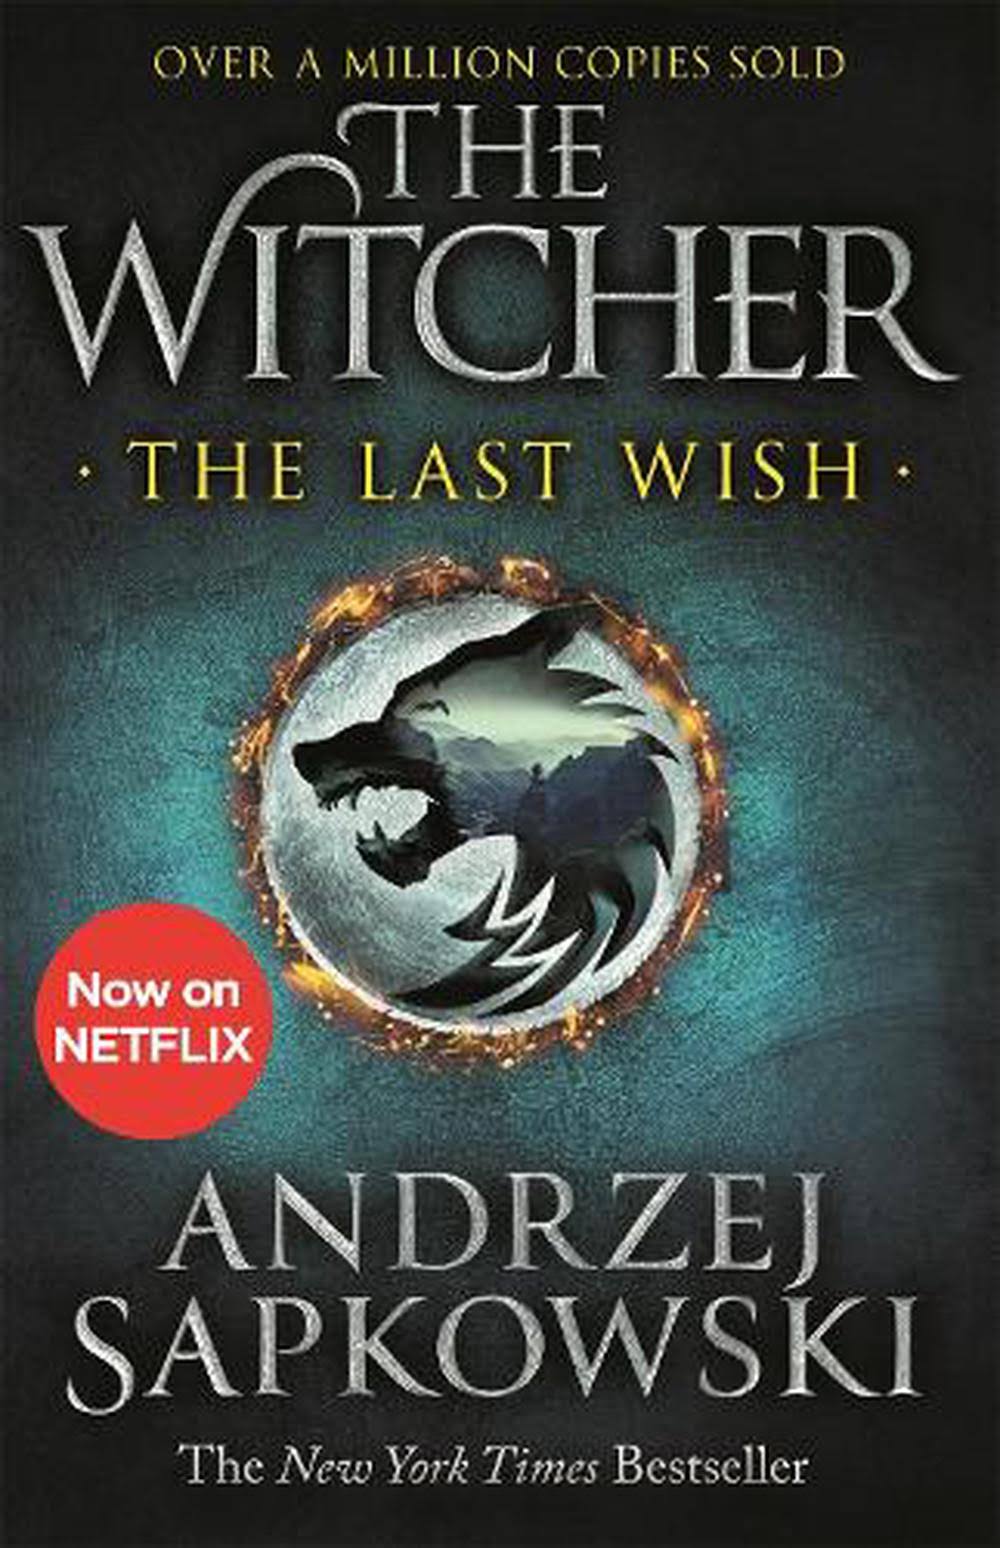 The Last Wish: Introducing the Witcher - Now a Major Netflix Show [Book]